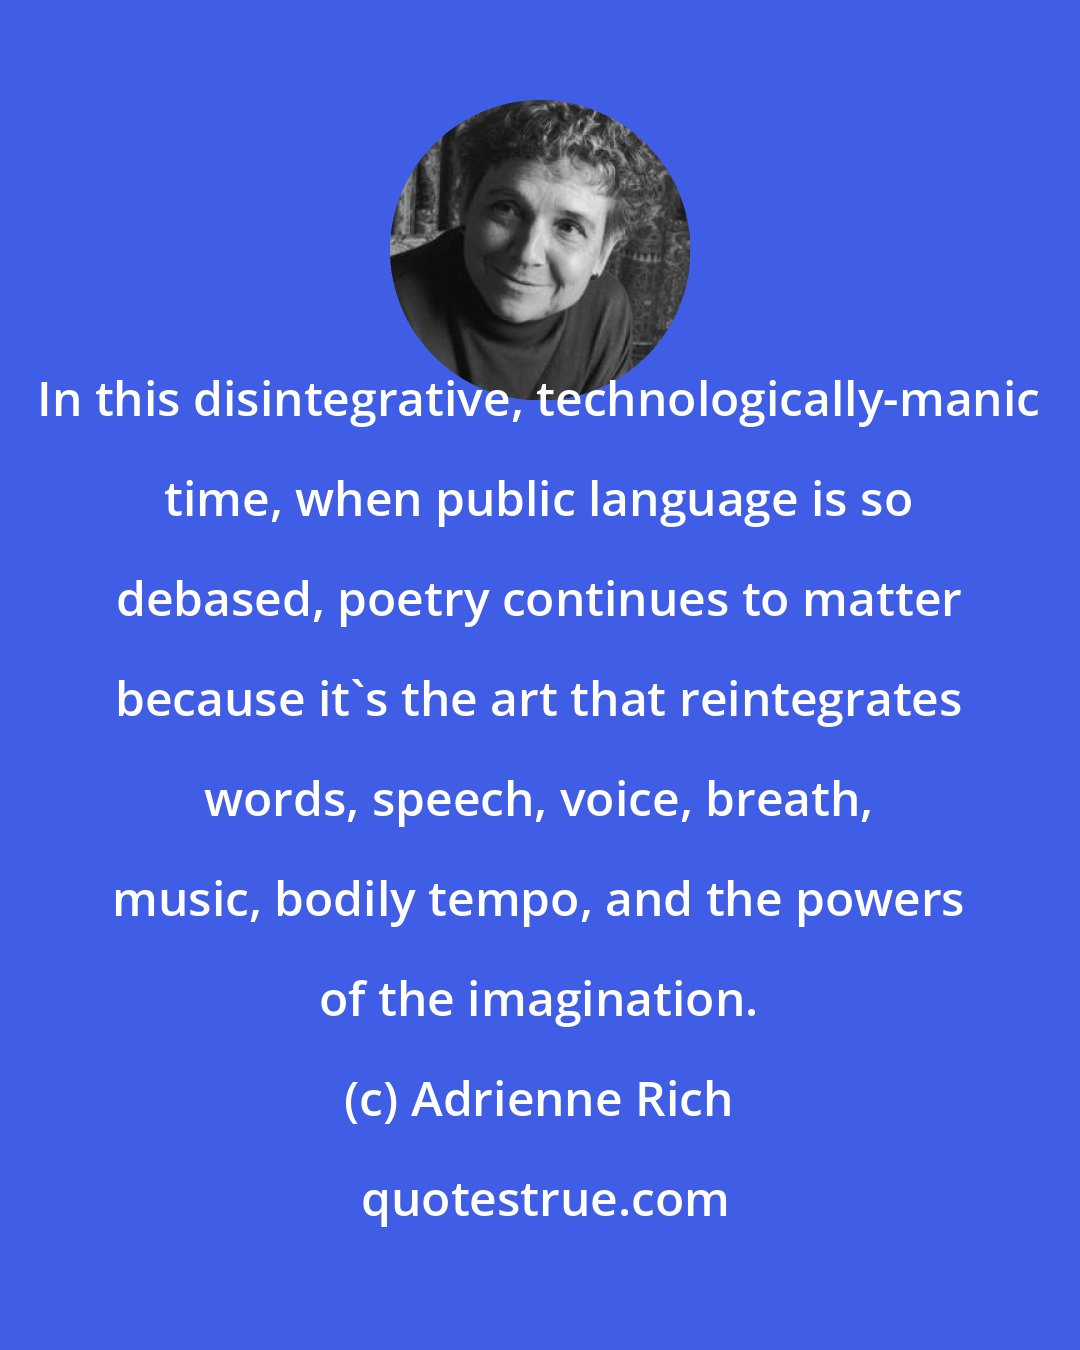 Adrienne Rich: In this disintegrative, technologically-manic time, when public language is so debased, poetry continues to matter because it's the art that reintegrates words, speech, voice, breath, music, bodily tempo, and the powers of the imagination.